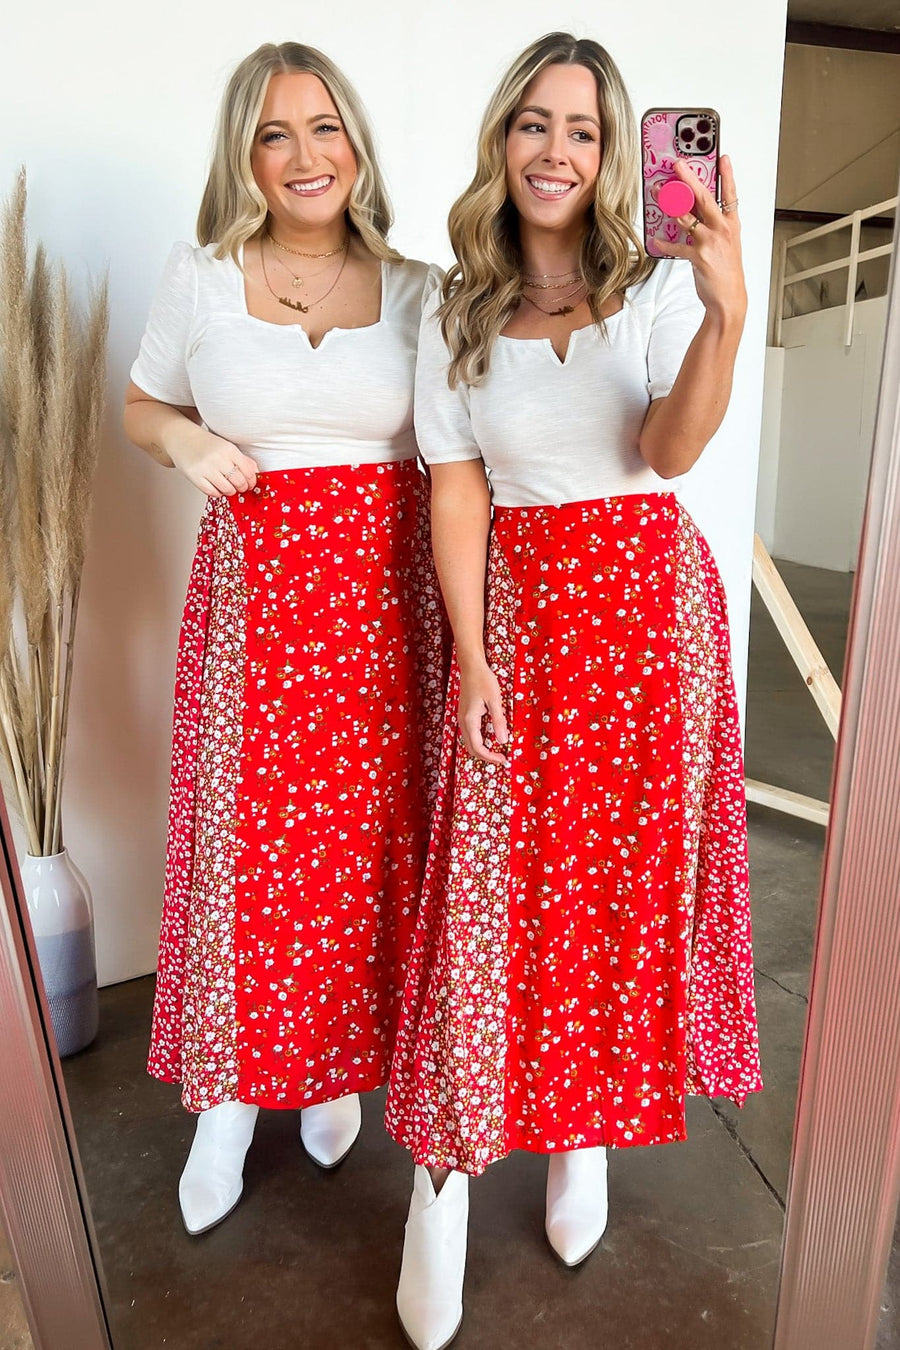  Blooming Perfection Floral Print Maxi Skirt - FINAL SALE - Madison and Mallory